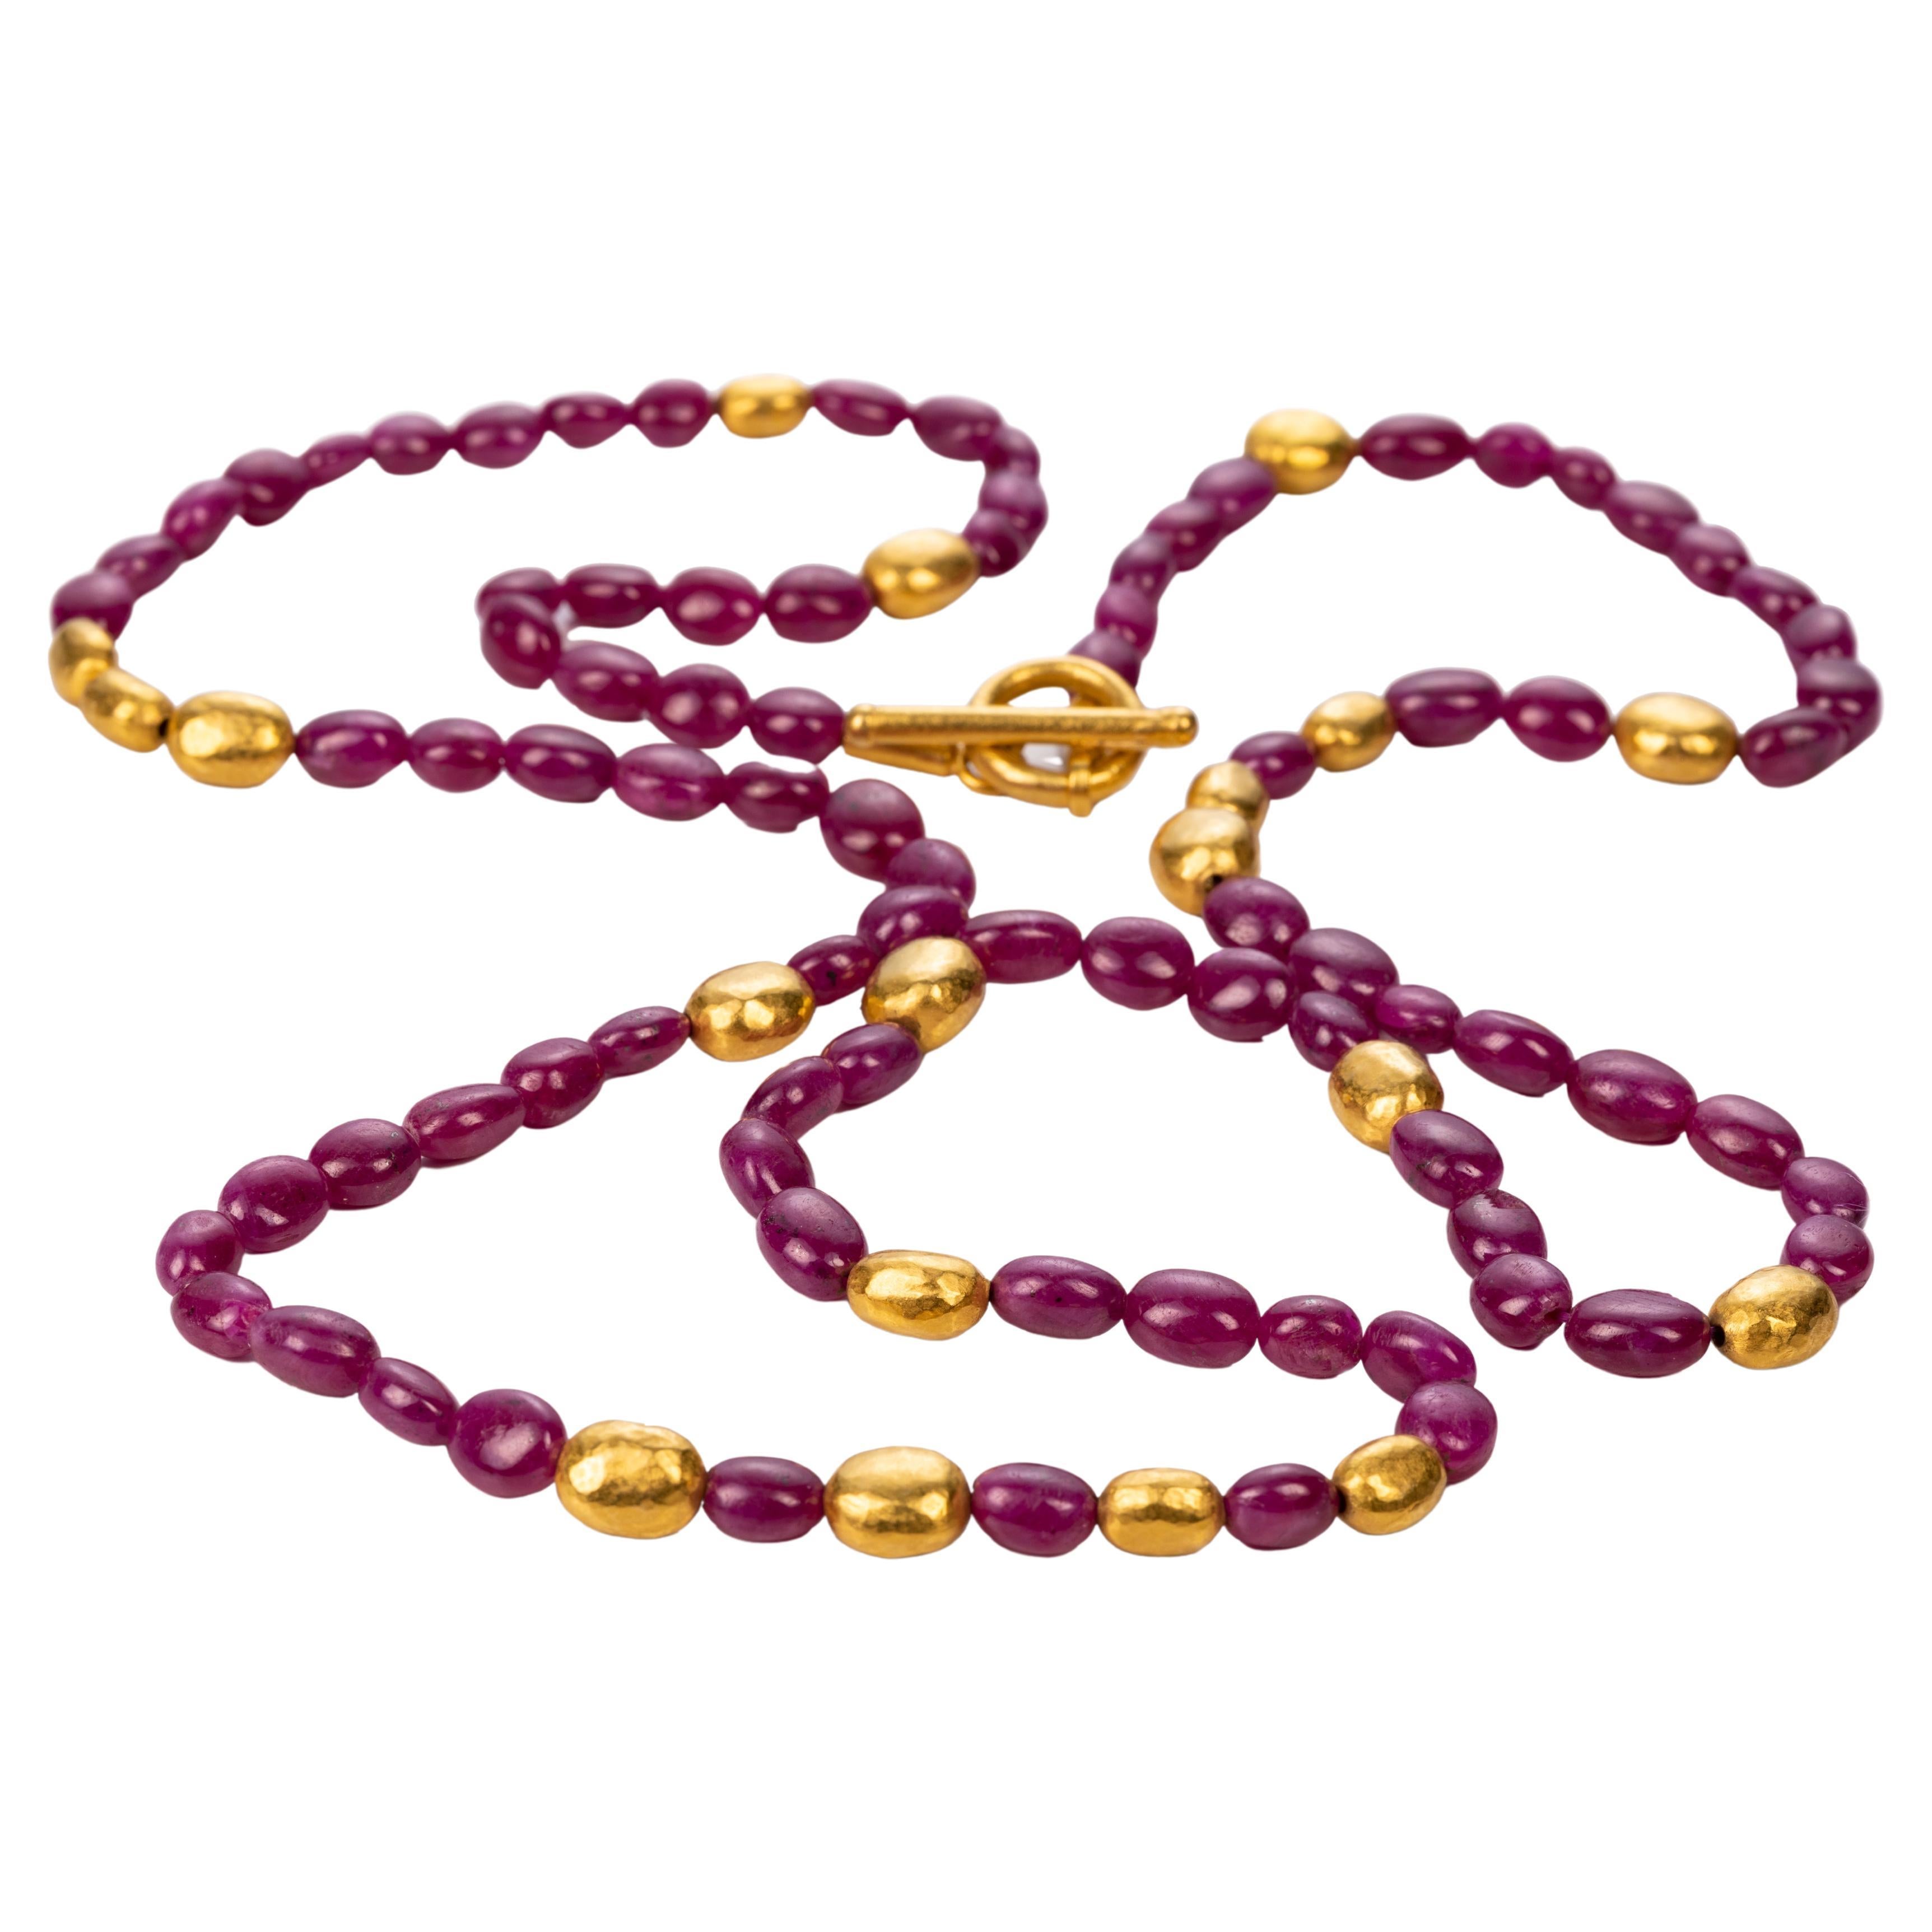 Yossi Harari Ruby and Gold Beaded Necklace